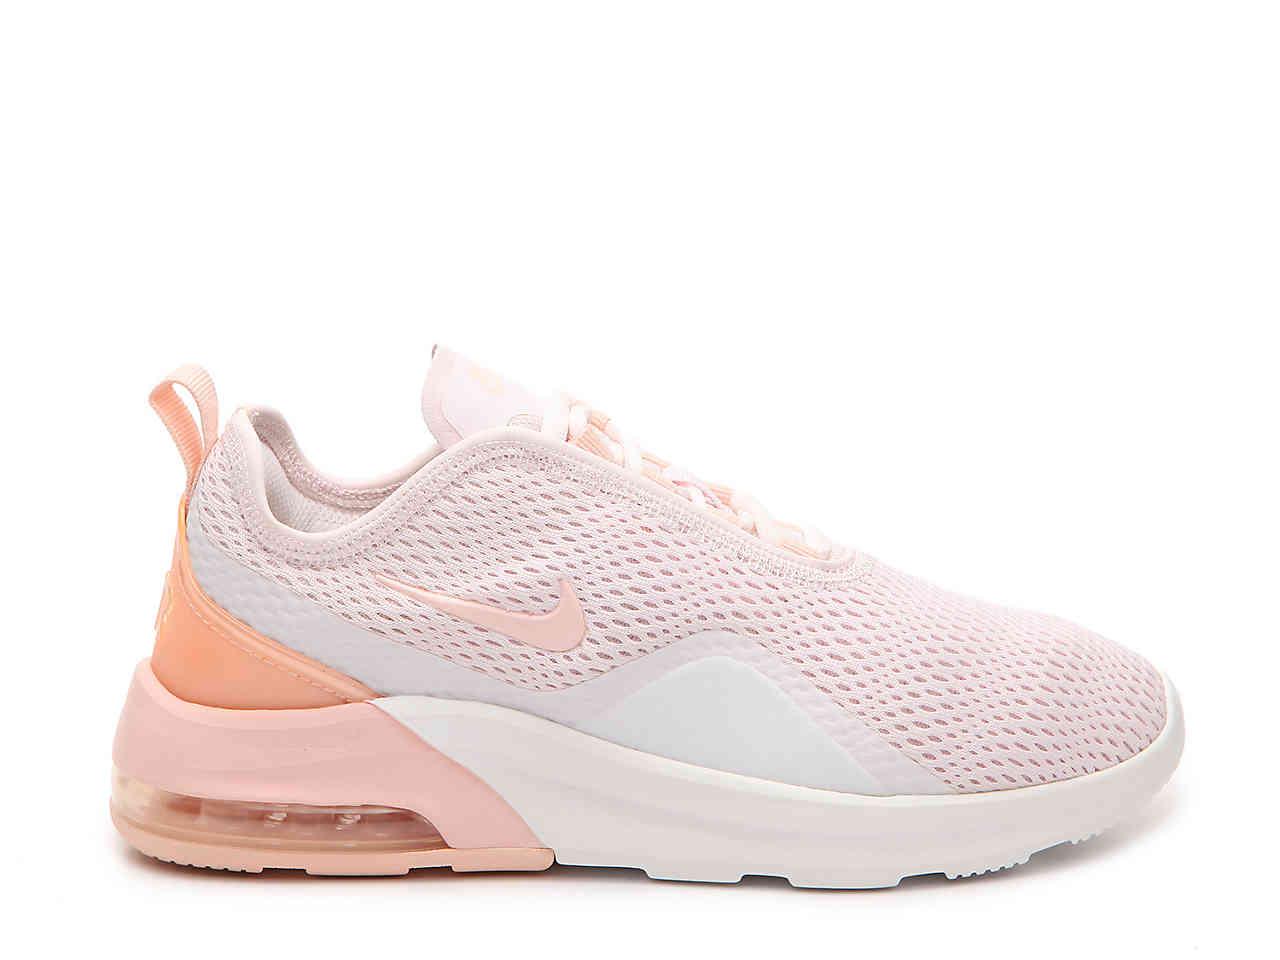 Air Max Motion 2 Sneaker in Pale Pink 